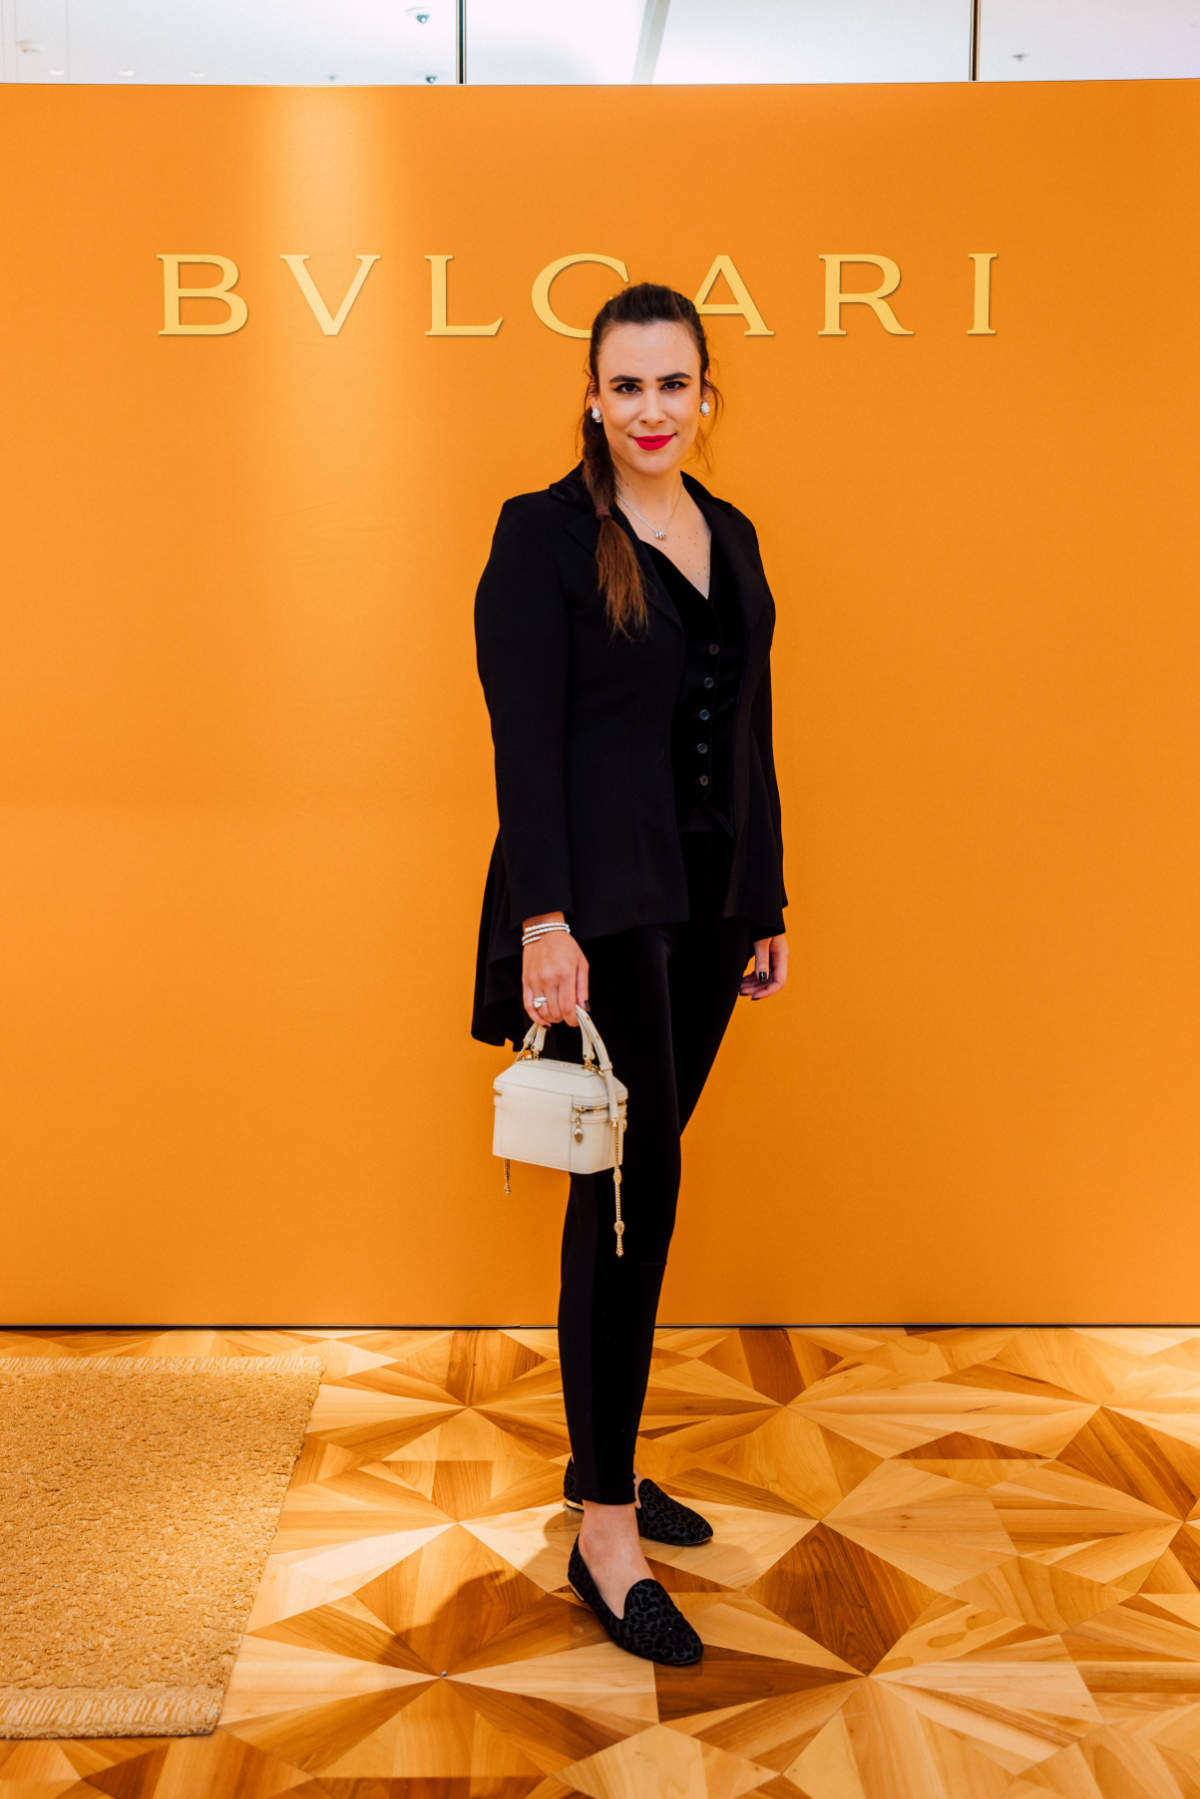 Bulgari Celebrated The Reopening Of Its Boutique In Bahnhofstrasse, Zurich